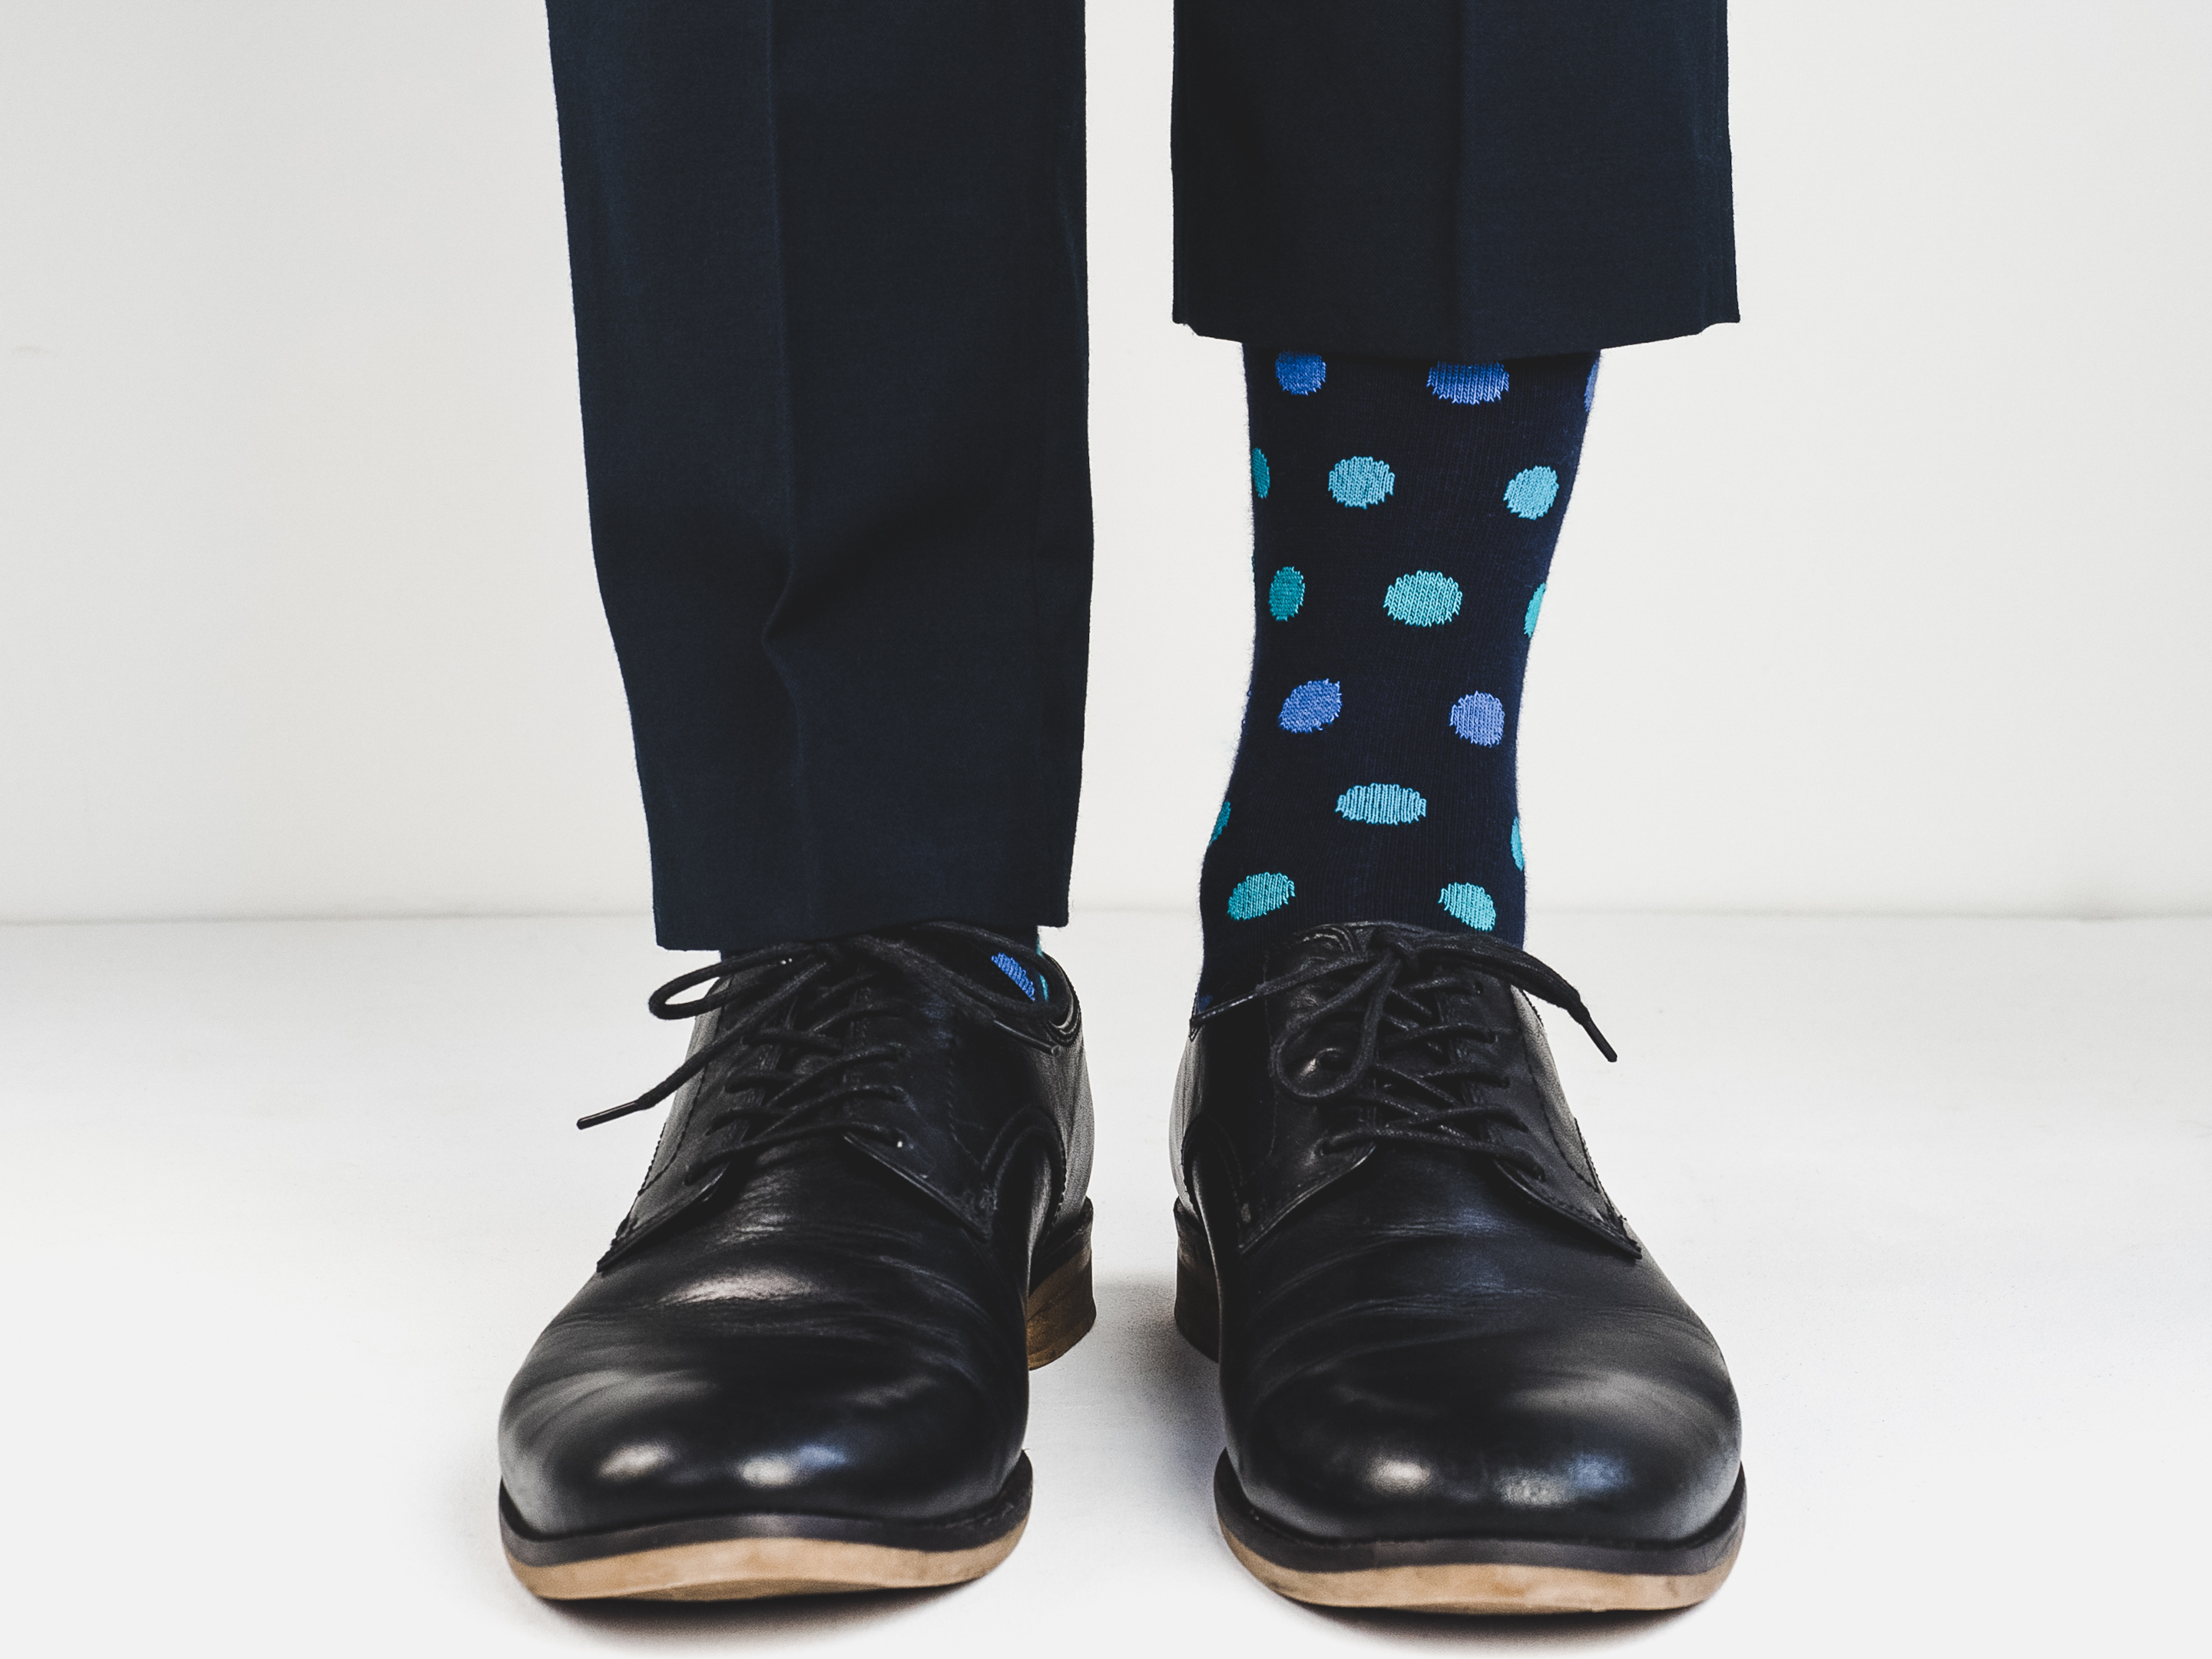 Colorful dot pattern socks with black shoes